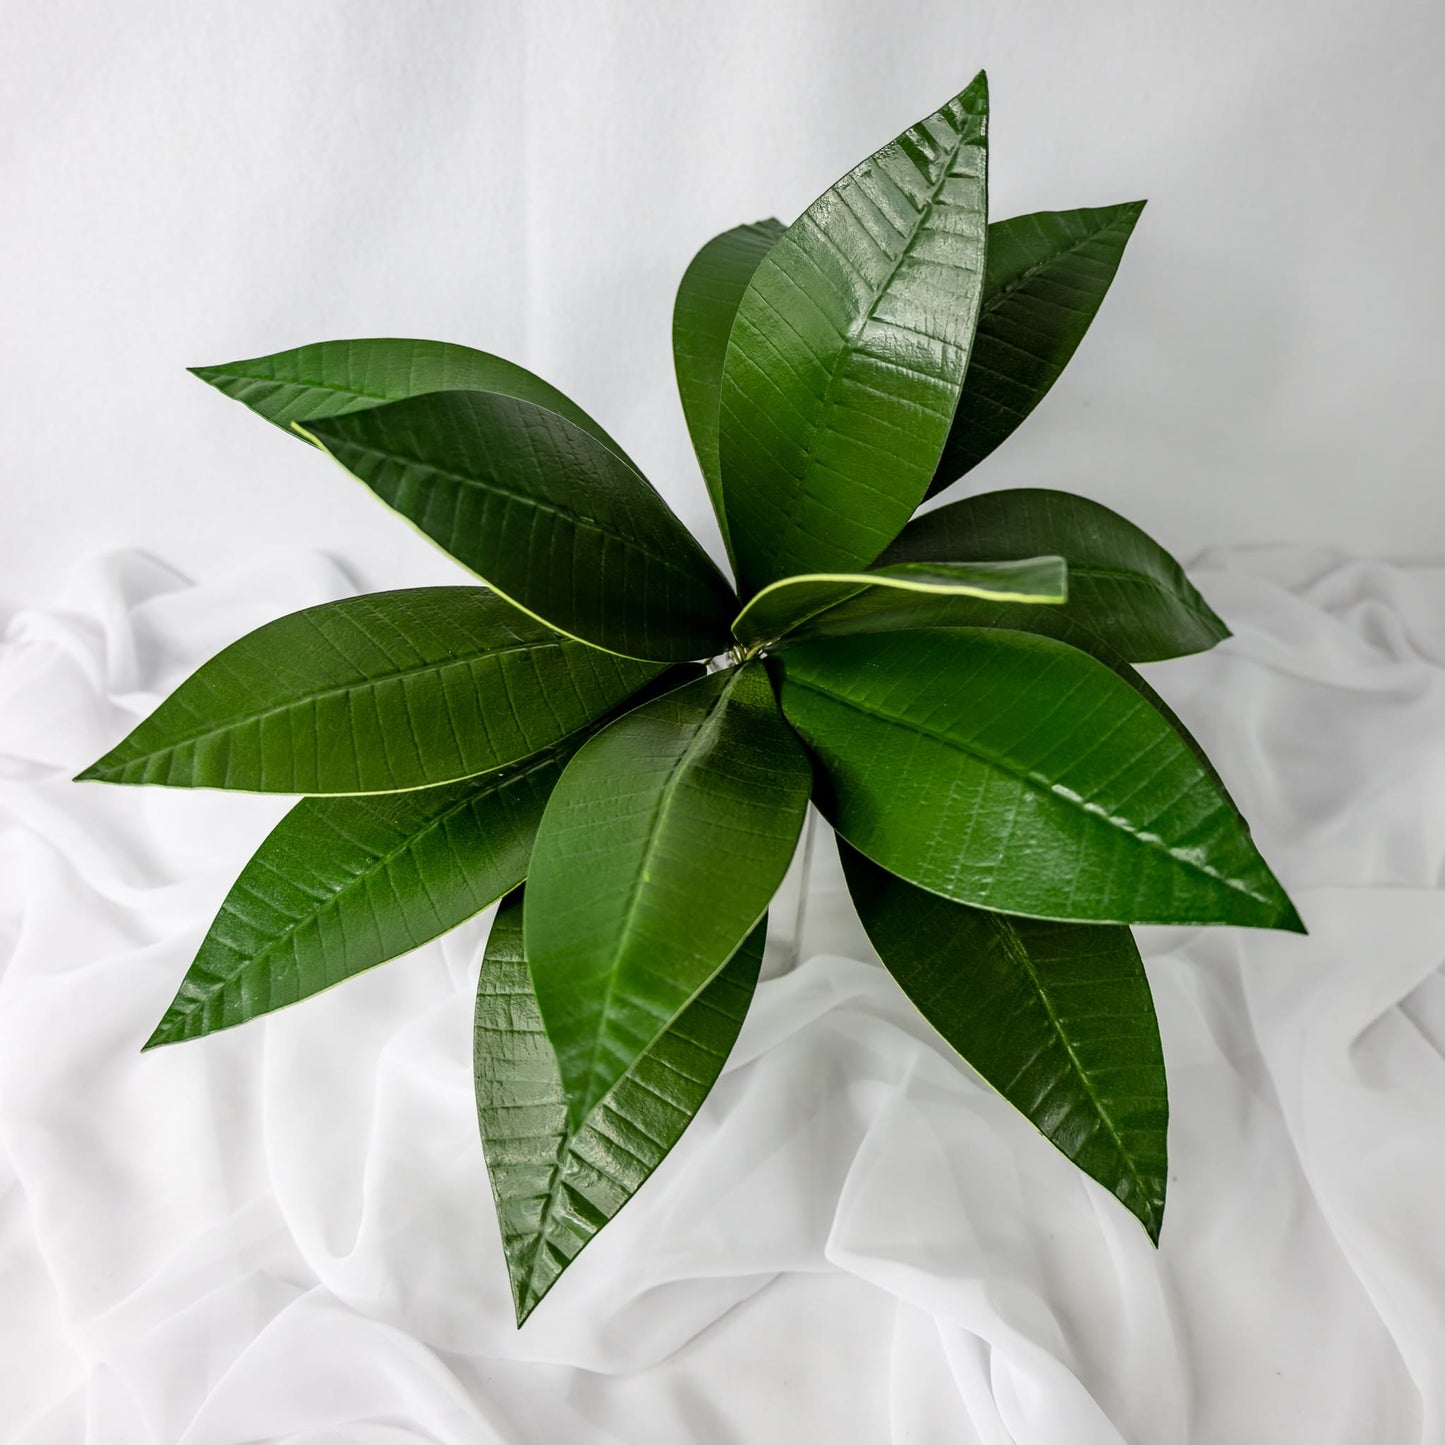 artificial pointed frangipani leaves placed in transparent glass vase